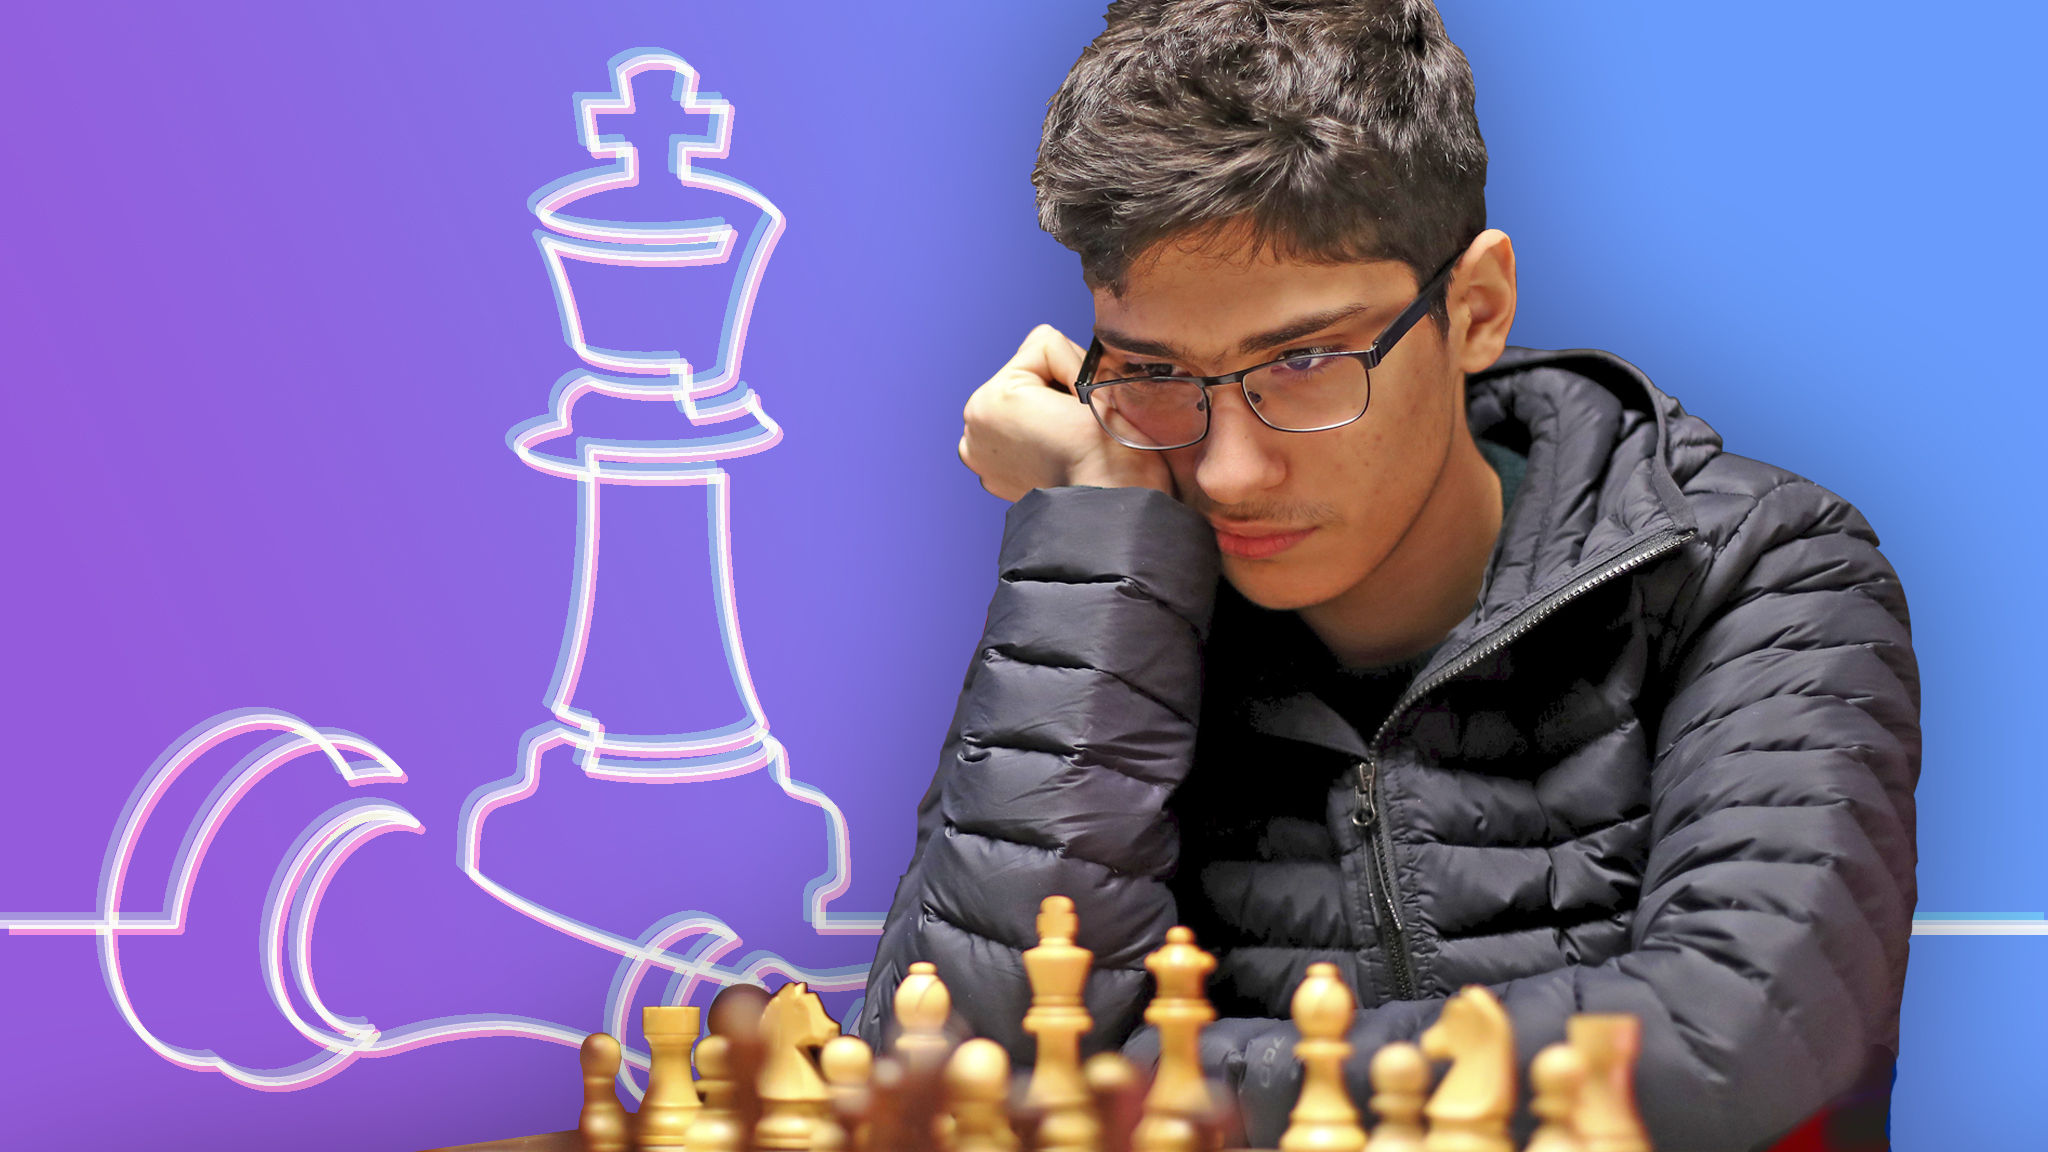 Teenage chess genius could become youngest World Champion - BBC Newsround